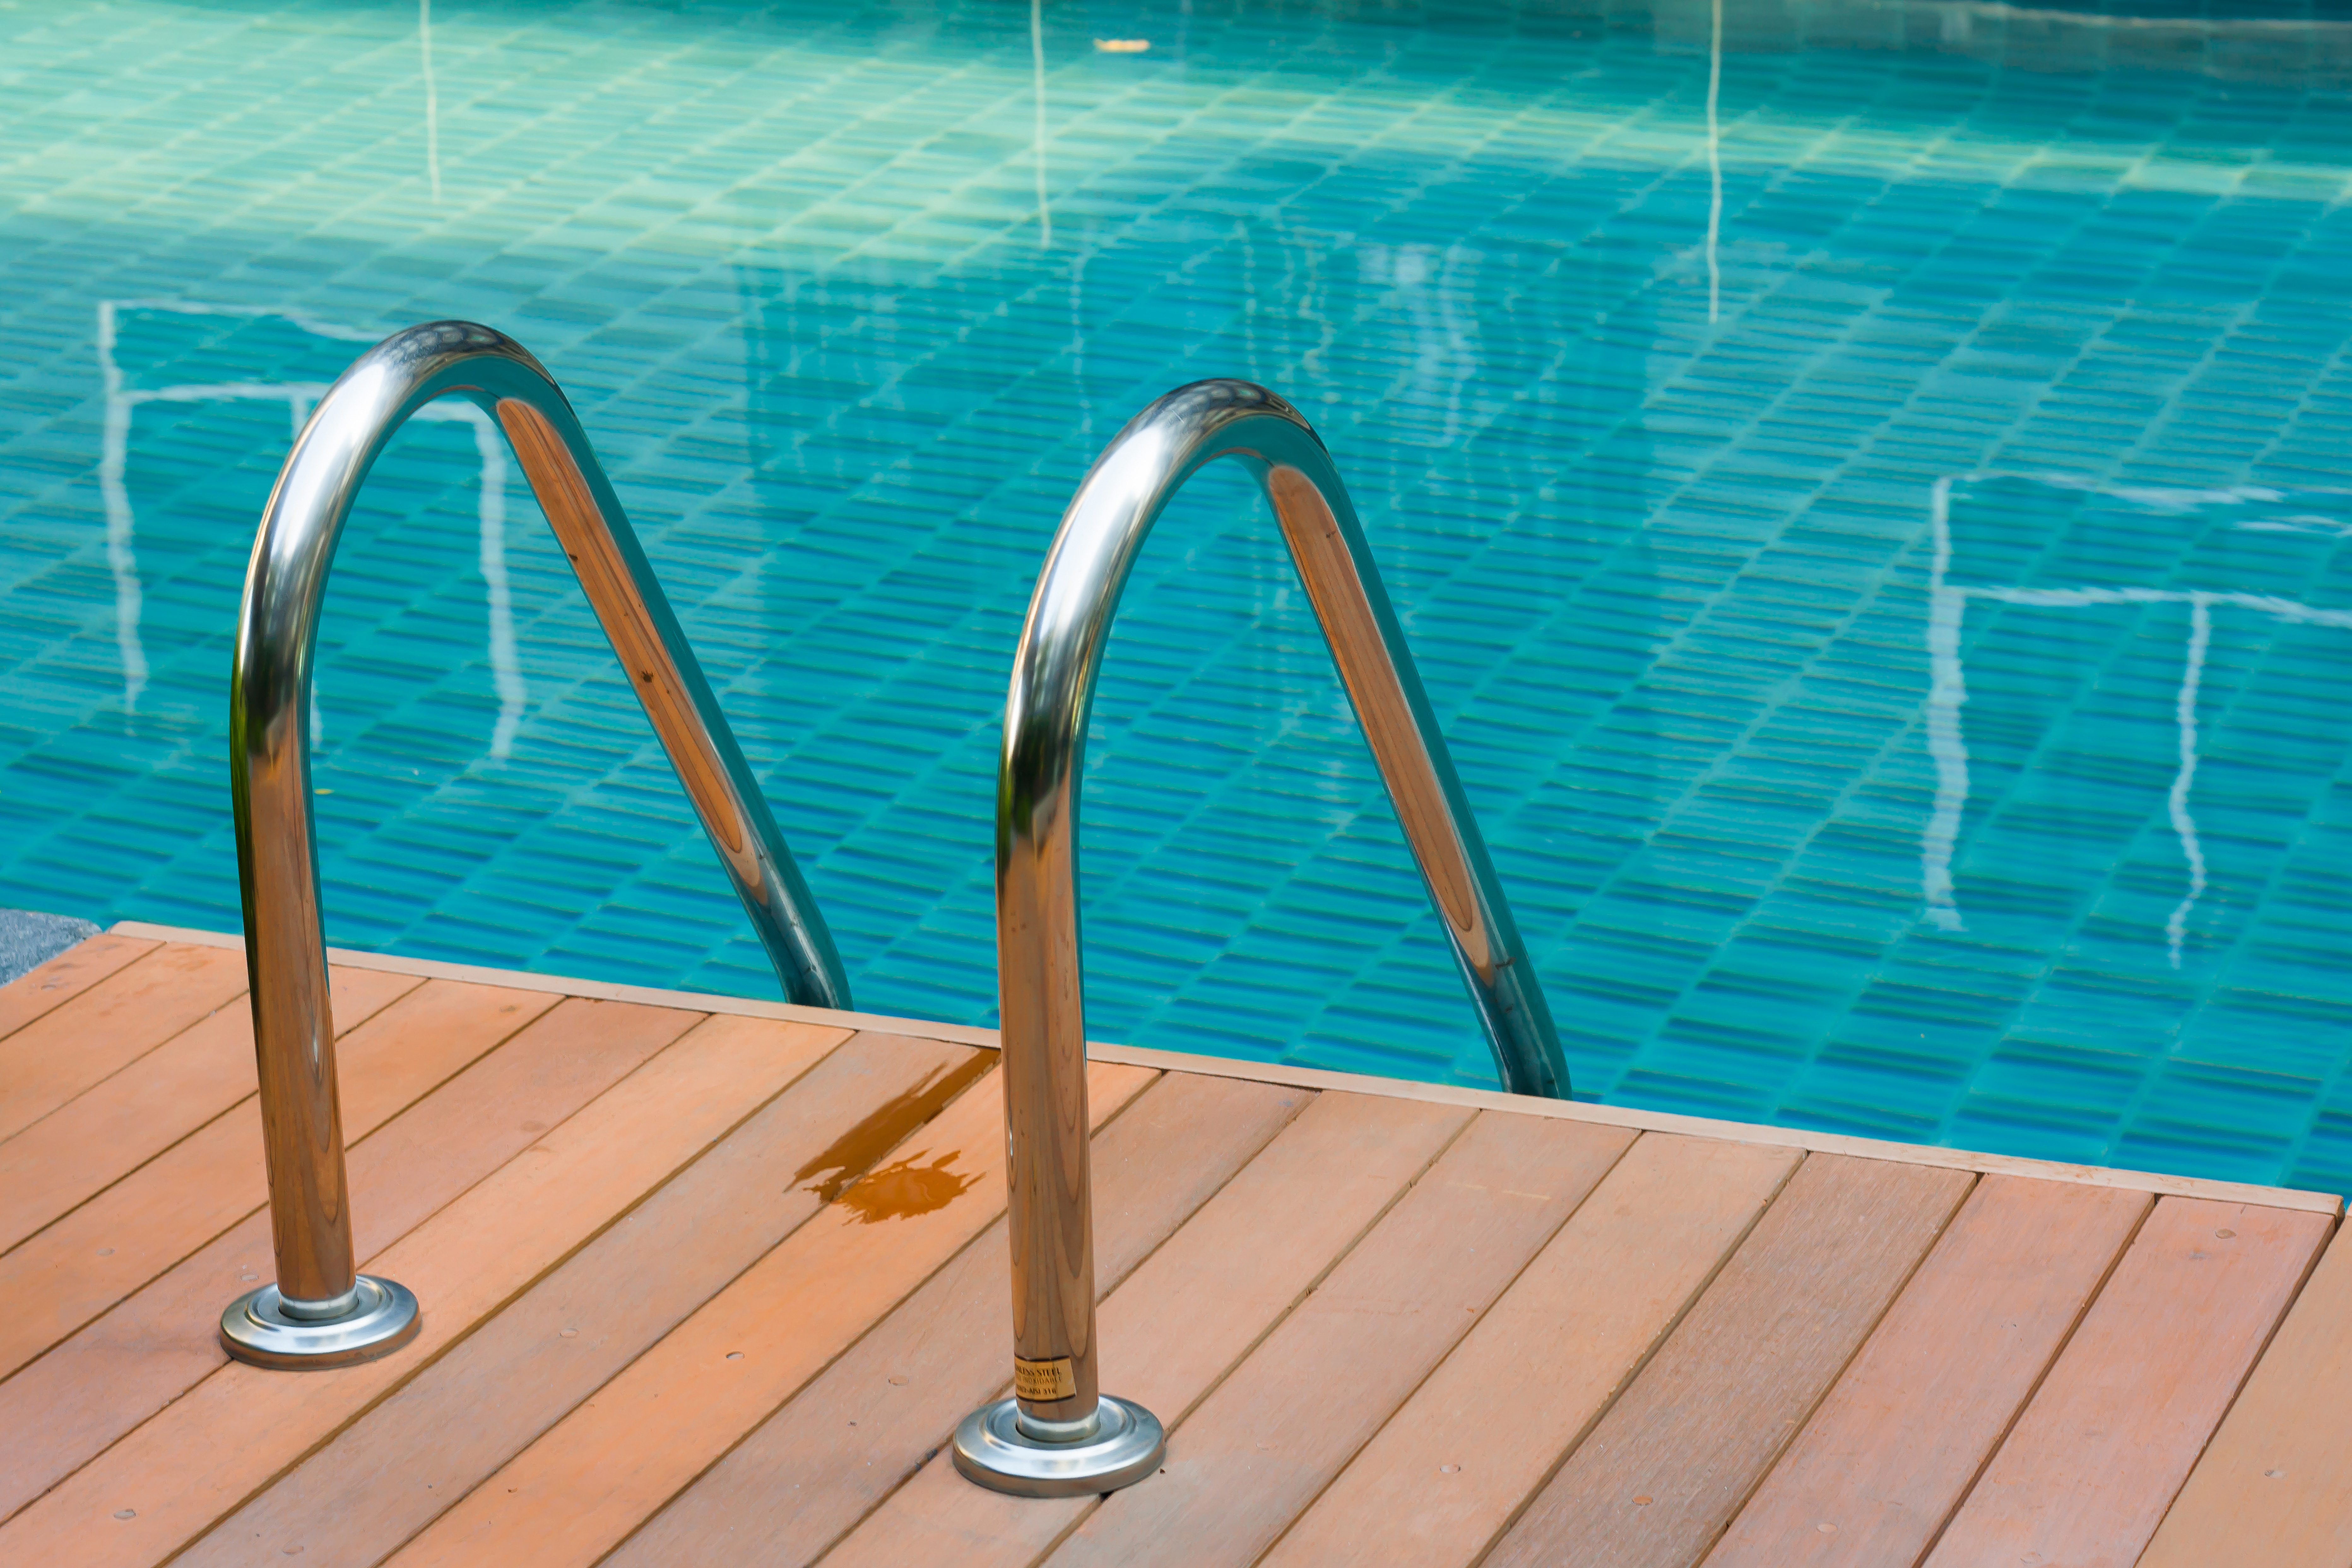 Is A Pool Right For Your Property?